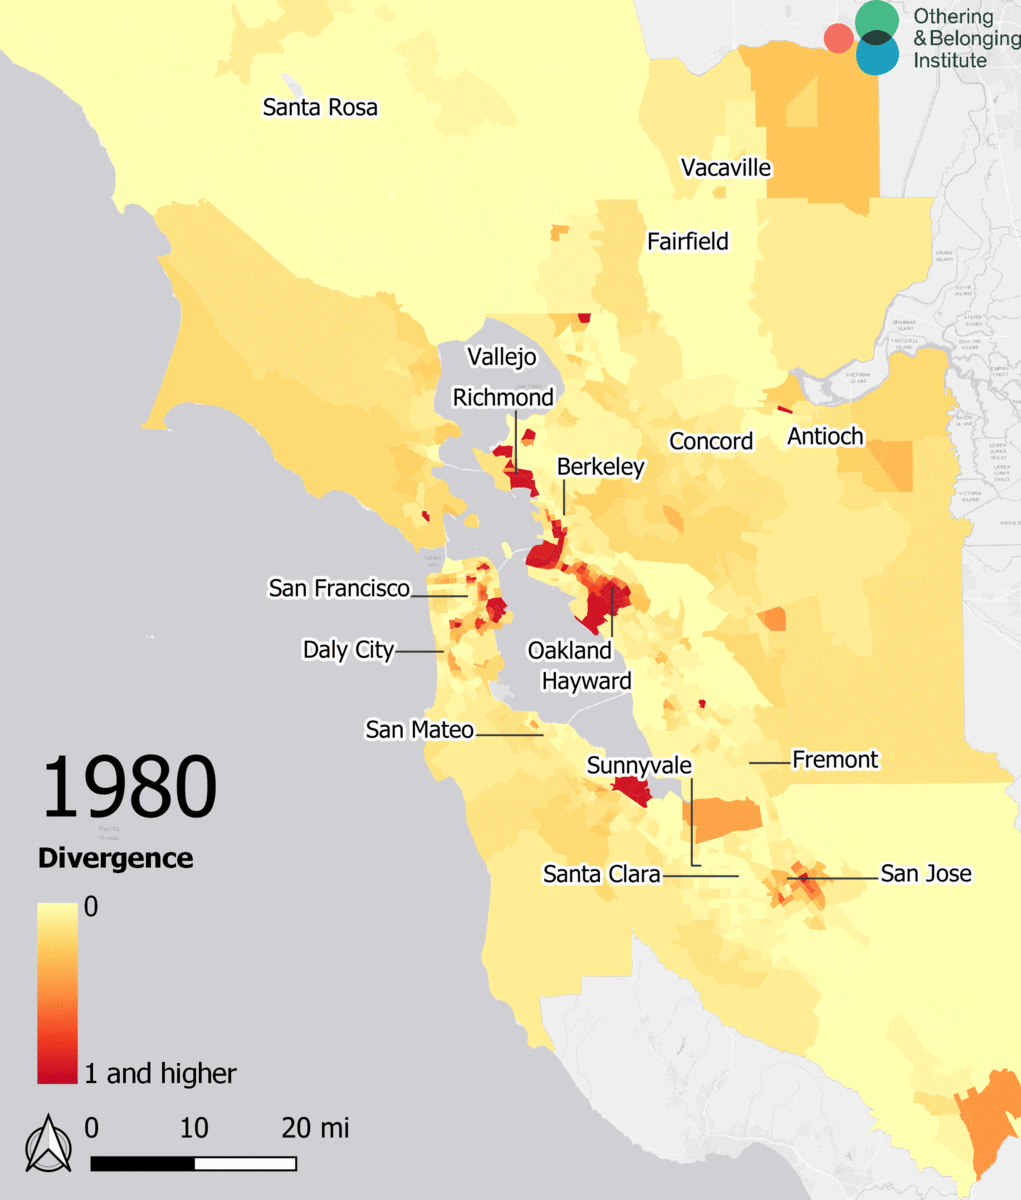 An animated map of the Bay Area showing divergence scores from 1980 to 2020